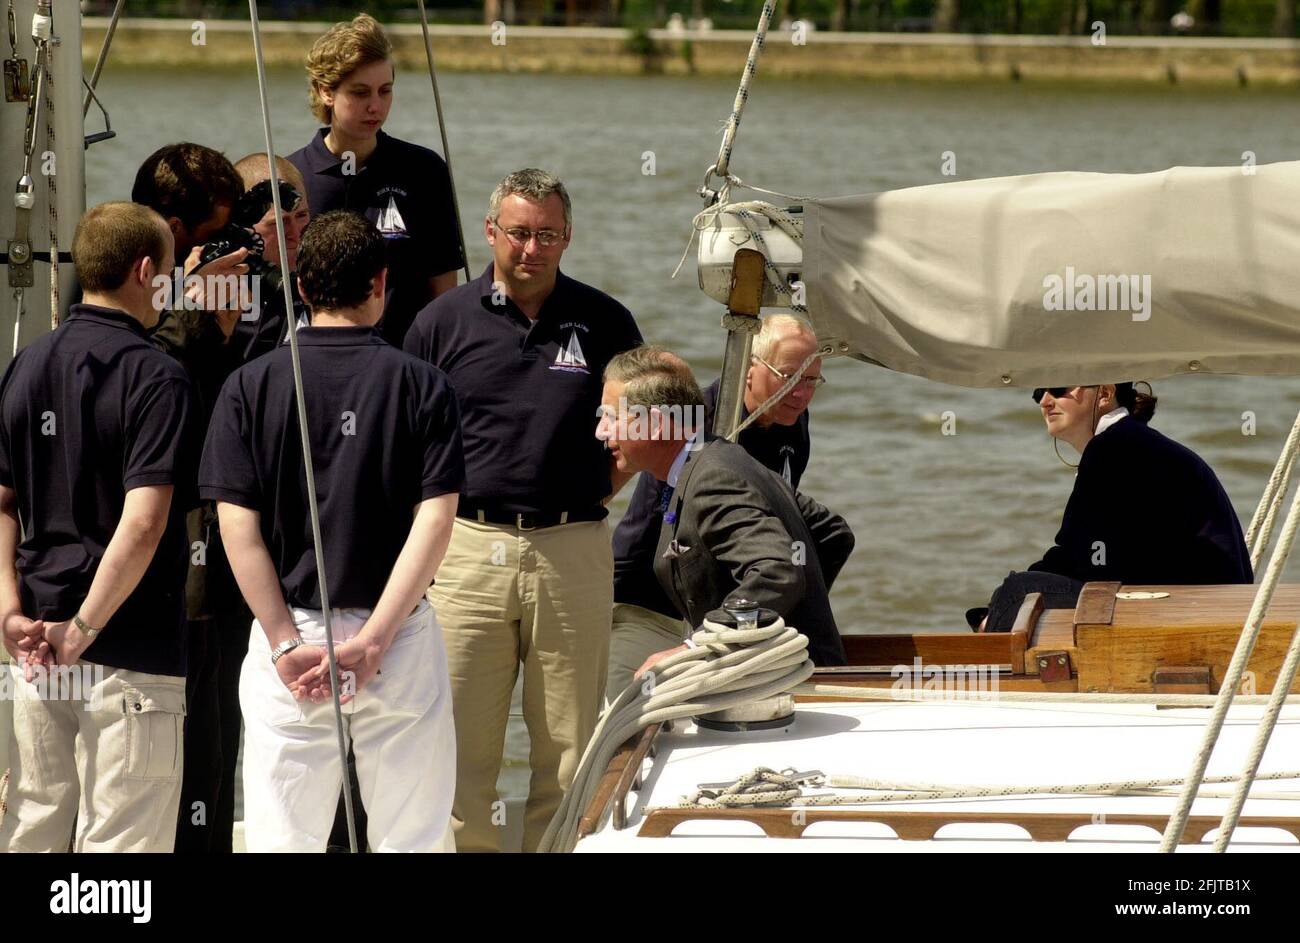 HIS ROYAL HIGHNESS PRINCE CHARLES MAY 2001ON BOARD THE 'JOHN LAING' BOAT WHICH WILL SAIL FROM PORTSMOUTH ON 27 AUGUST 2001 TO COMMENCE A TRIP TO THE ANTARCTIC PENINSULARS DANCO COAST WHERE THE TEAM OF 16 MEN AND WOMEN WILL SPEND 3 MONTHS EXPLORING LARGELY UNCHARTERED TERRITORY Stock Photo